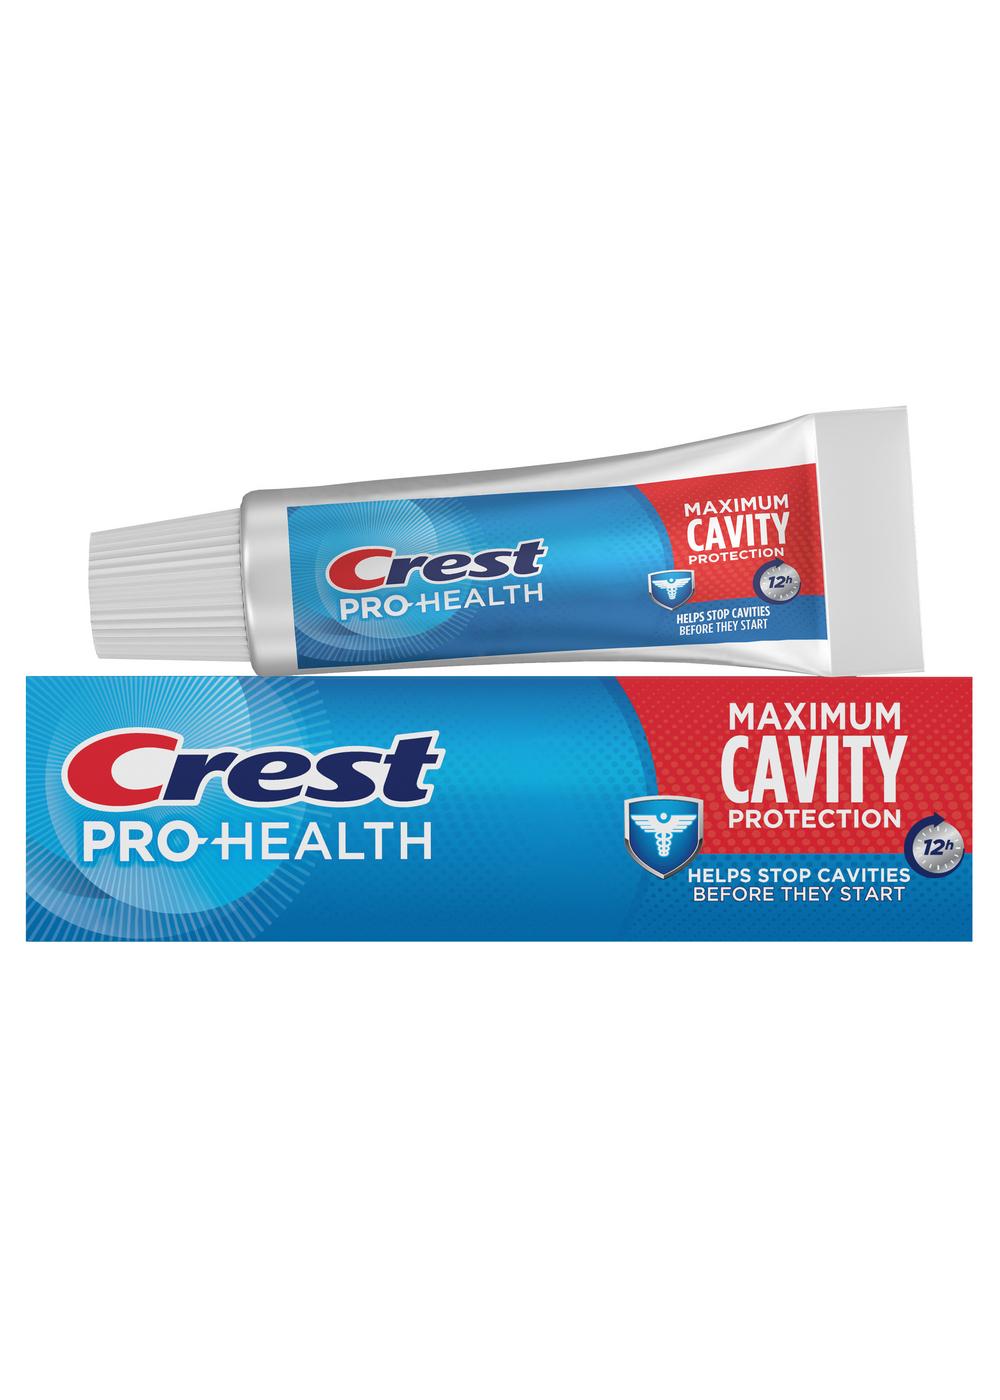 Crest Pro-Health Maximum Cavity Protection Toothpaste; image 9 of 9